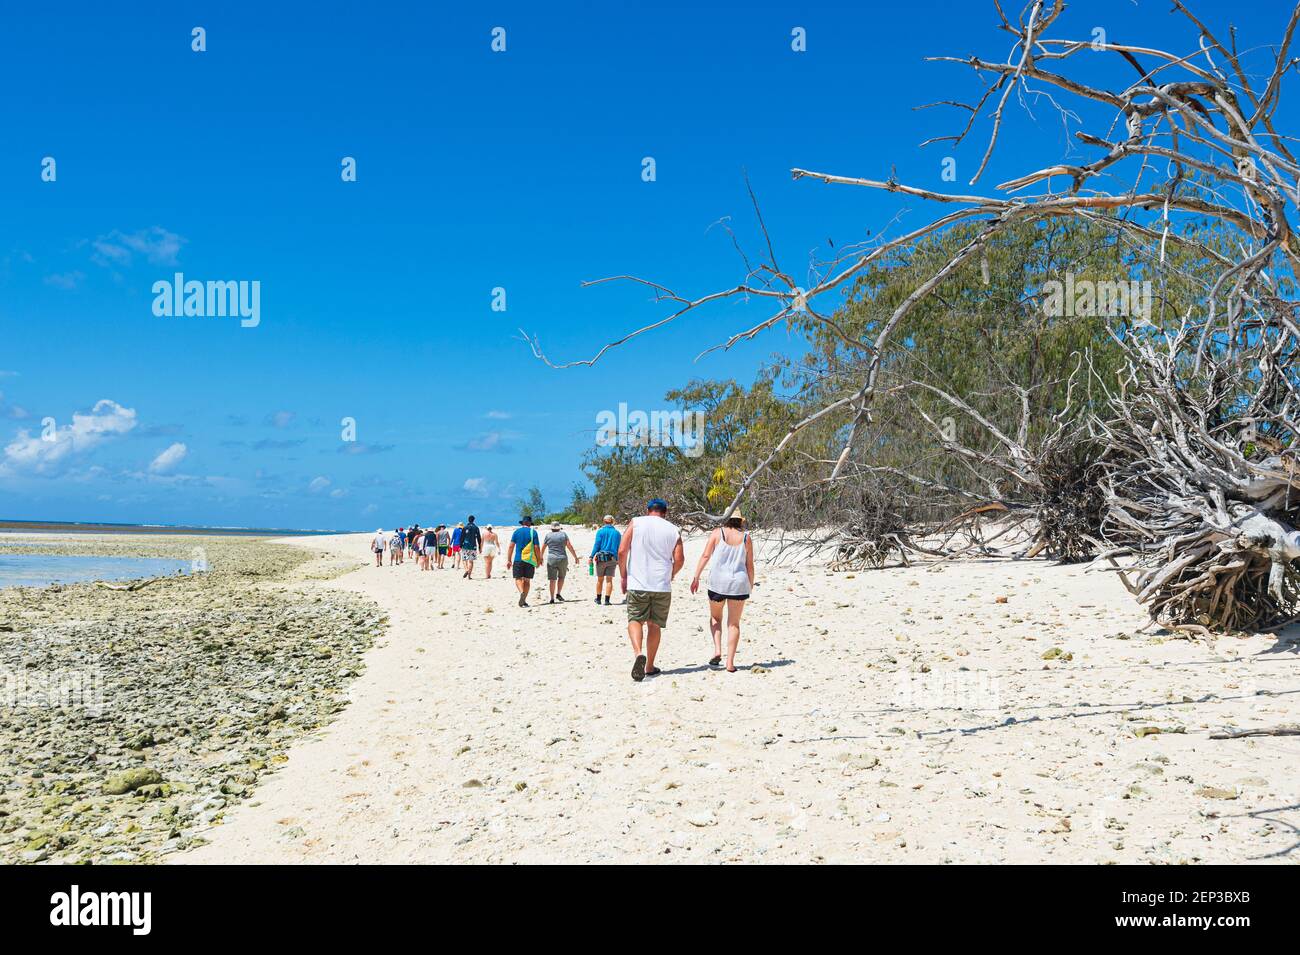 Tourists on a day trip to Lady Musgrave Island walking on the beach, Southern Great Barrier Reef, Queensland, QLD, Australia Stock Photo